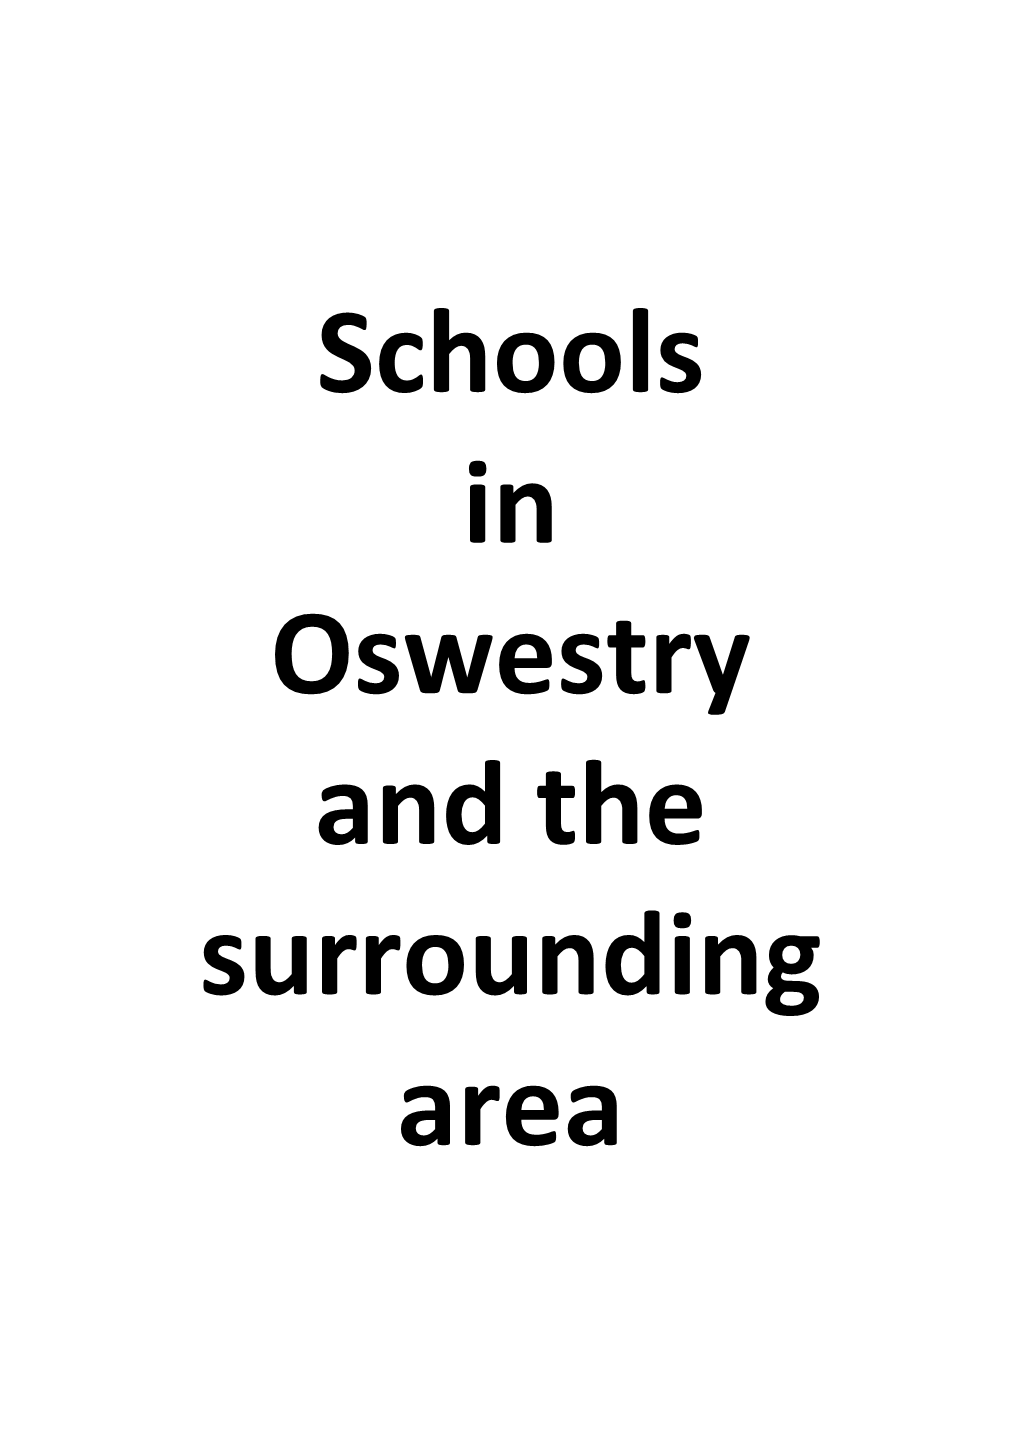 Schools in Oswestry and the Surrounding Area